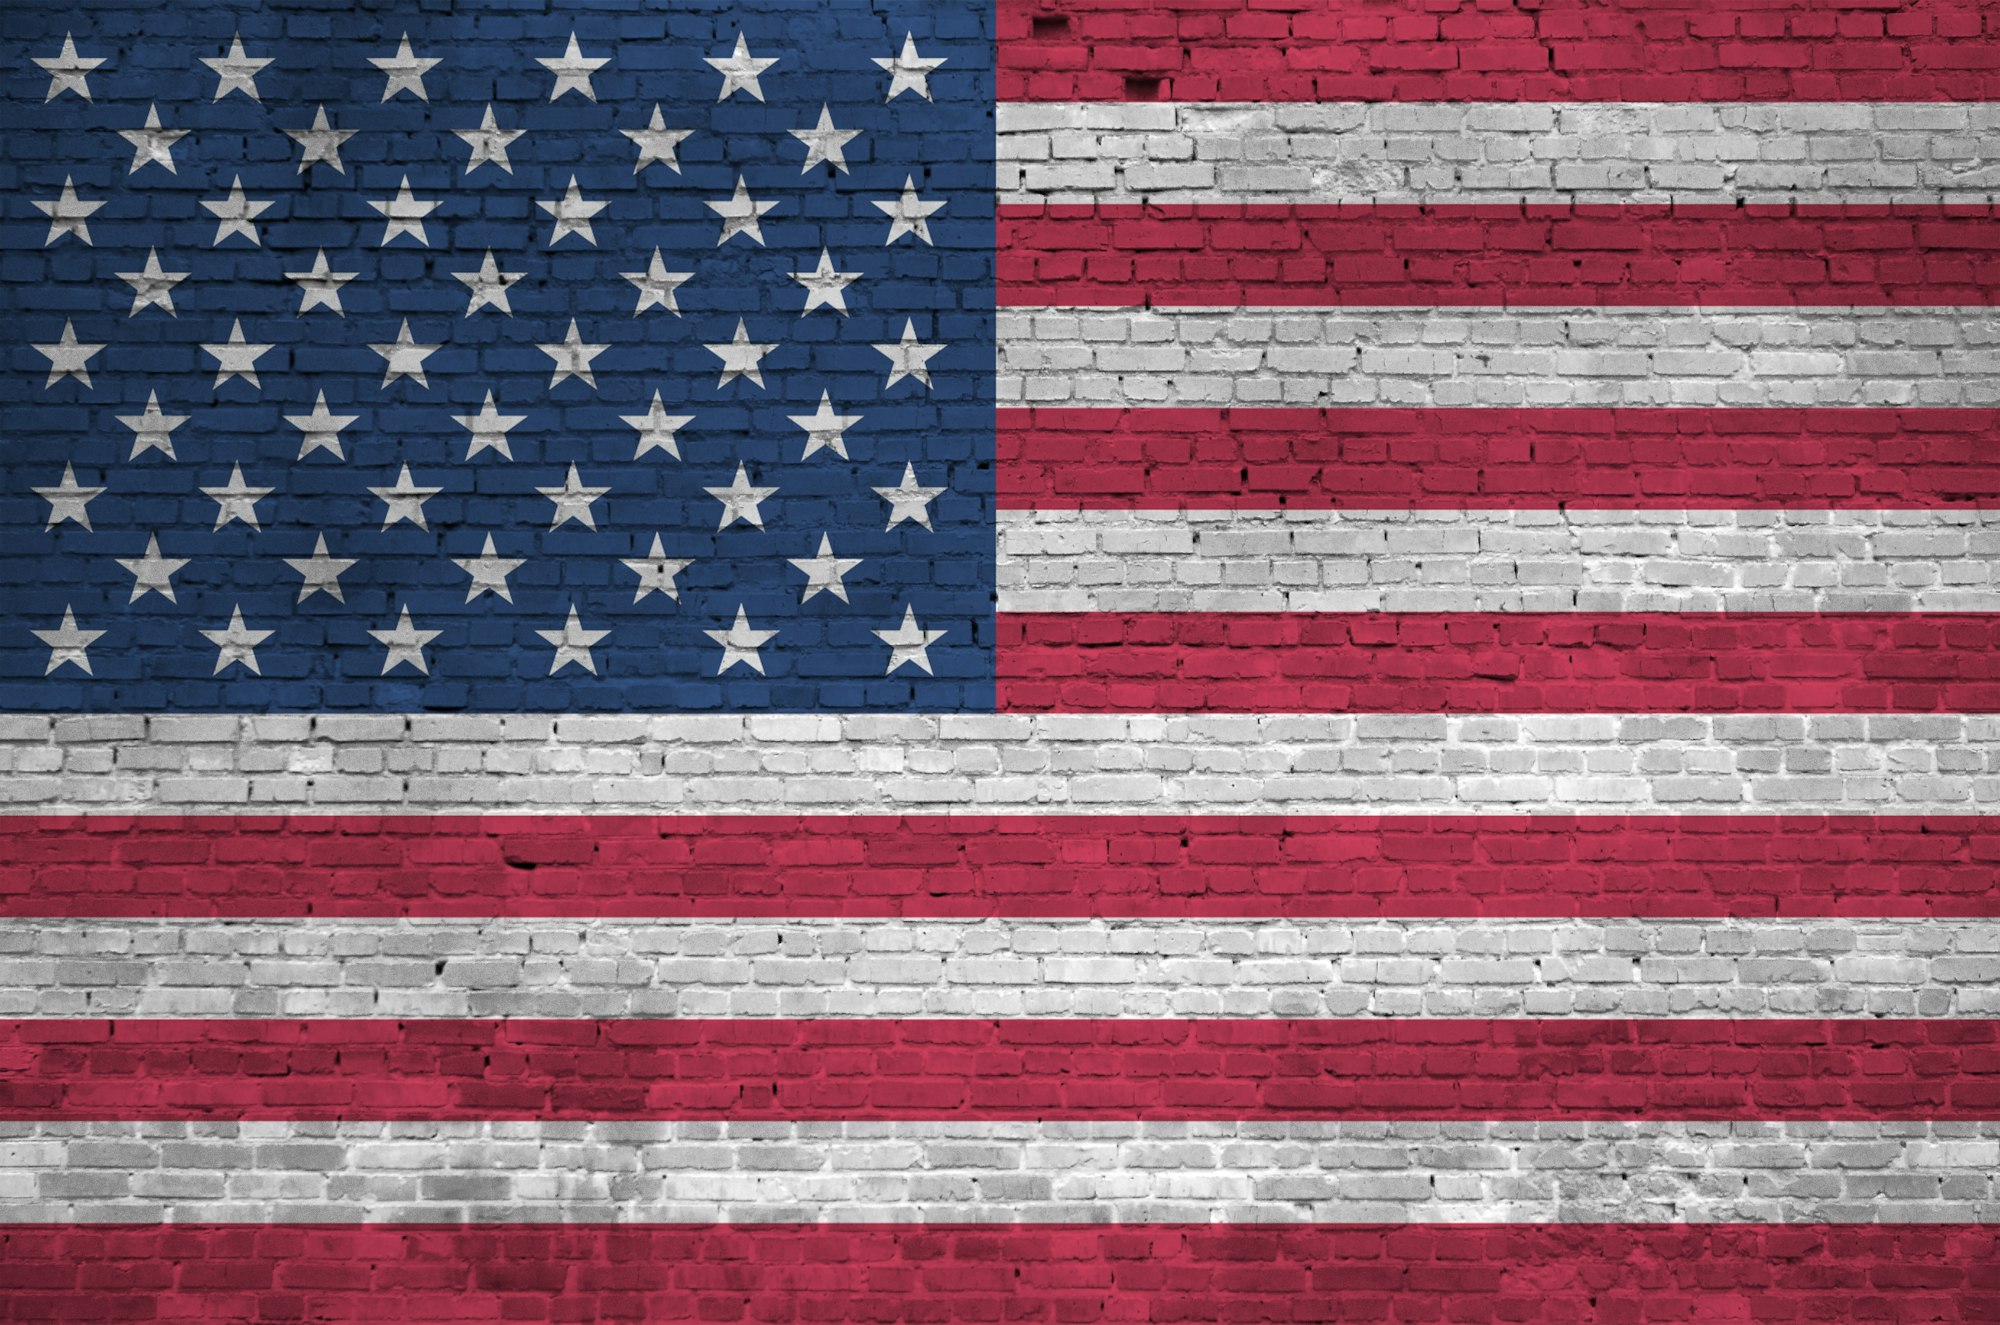 United States of America flag depicted in paint colors on old brick wall close up